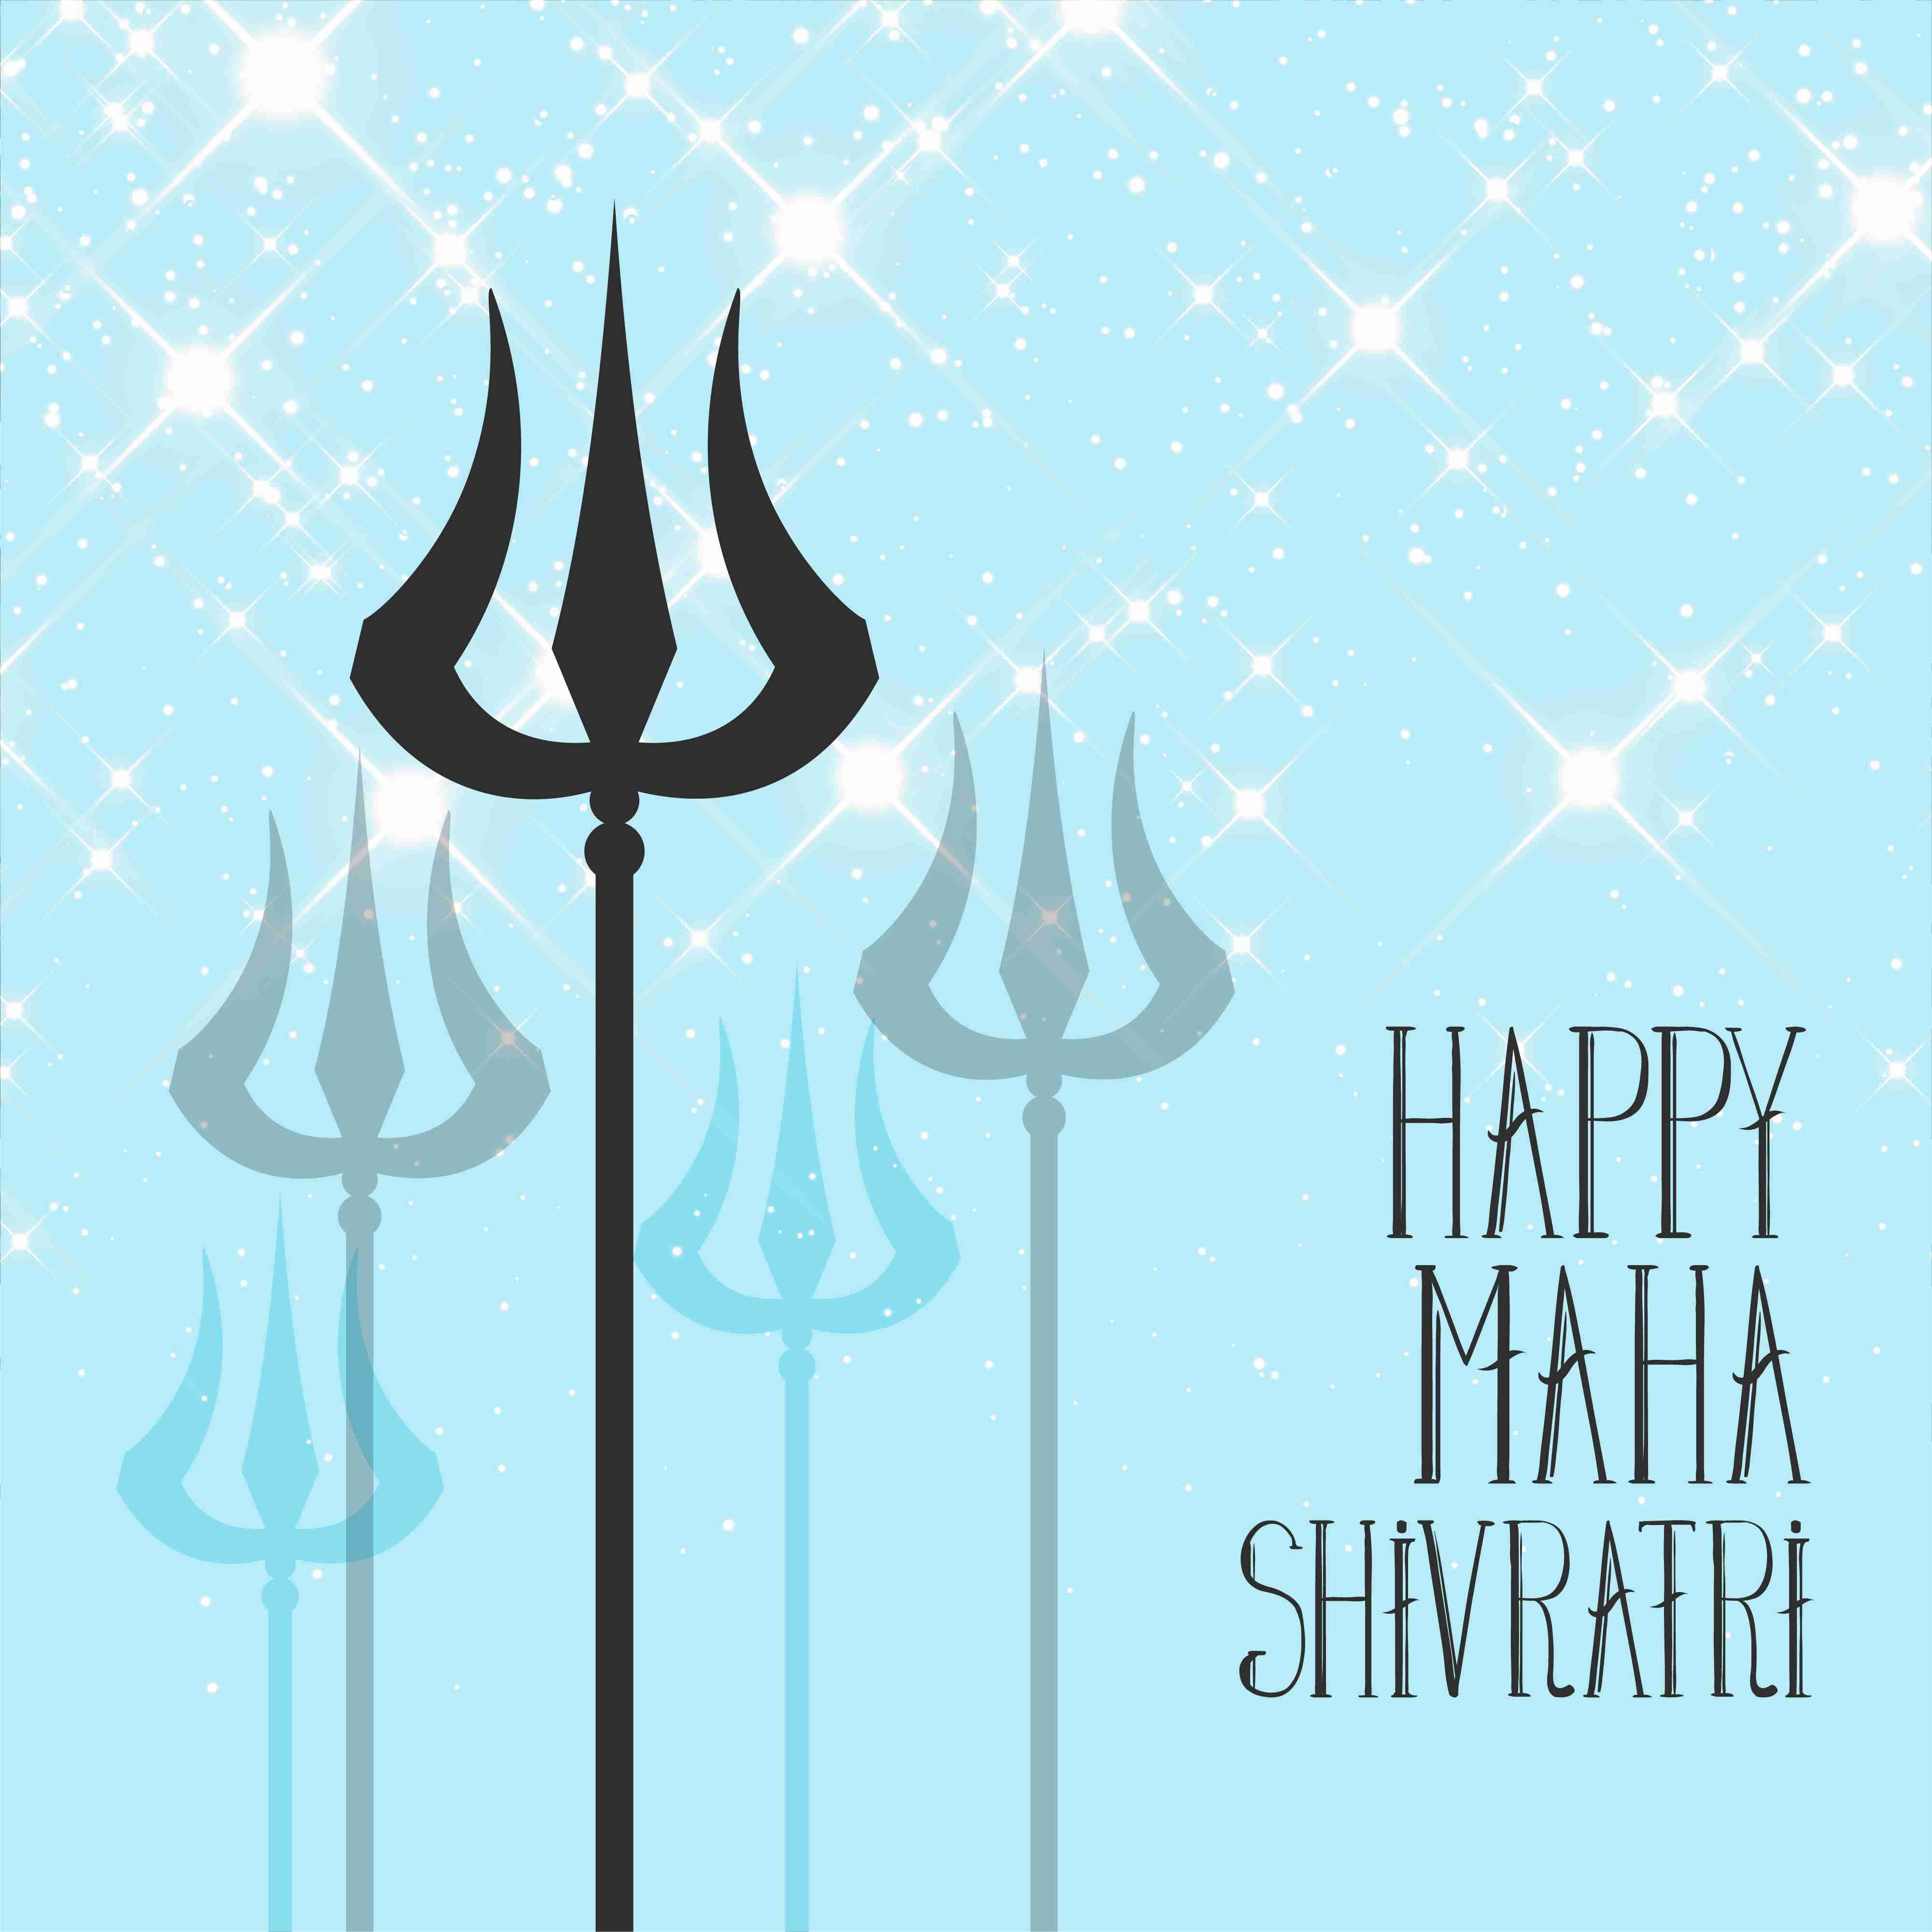 lord shiva trishul clipart of flowers vector image illustrations